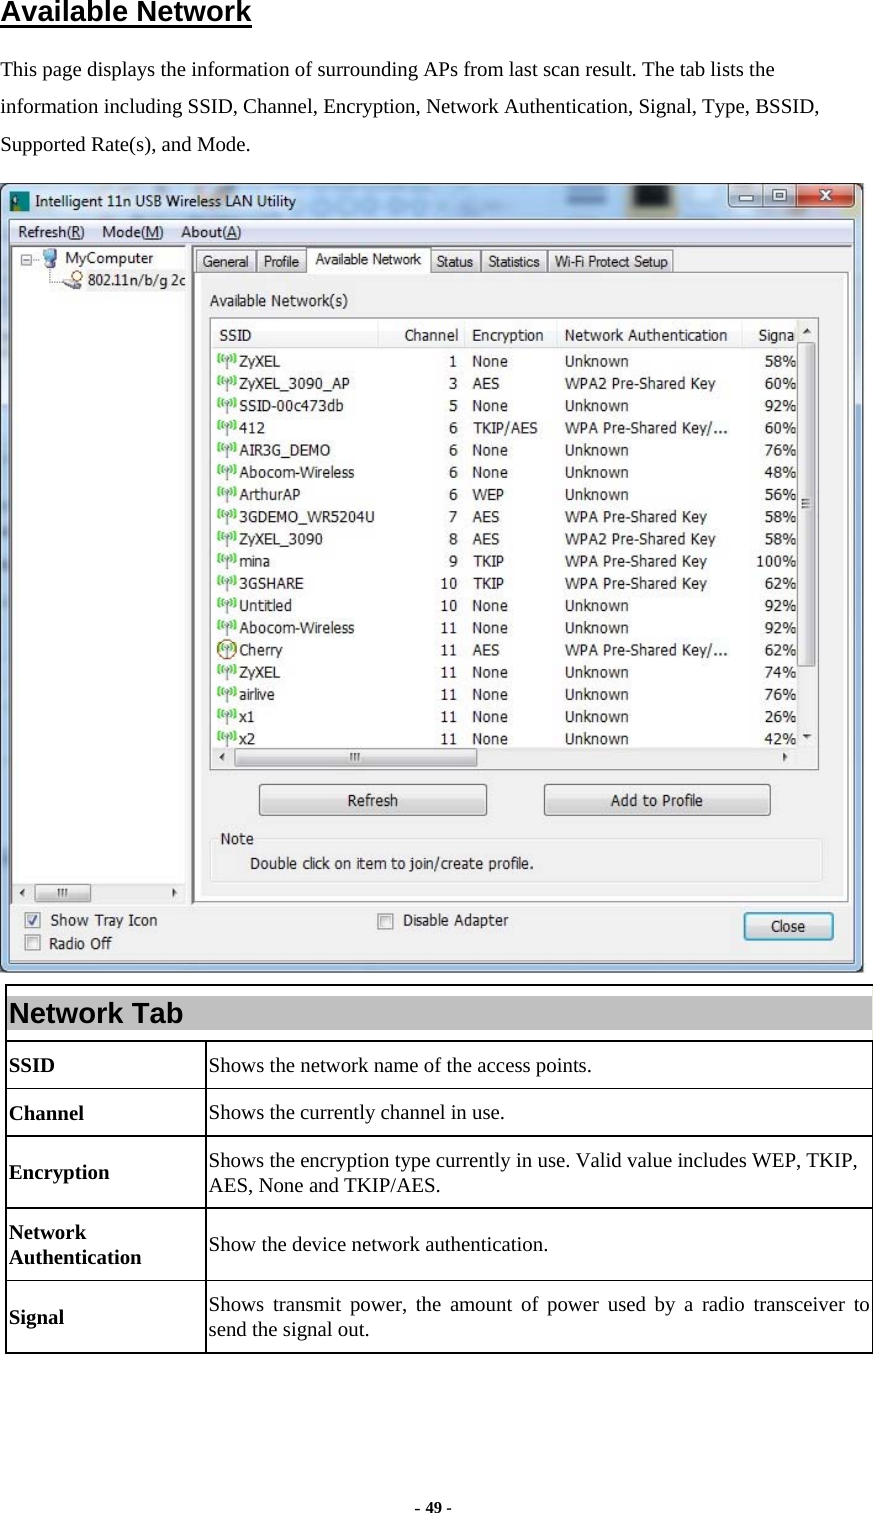  - 49 -  Available Network This page displays the information of surrounding APs from last scan result. The tab lists the information including SSID, Channel, Encryption, Network Authentication, Signal, Type, BSSID, Supported Rate(s), and Mode.  Network Tab SSID  Shows the network name of the access points. Channel  Shows the currently channel in use. Encryption  Shows the encryption type currently in use. Valid value includes WEP, TKIP, AES, None and TKIP/AES. Network Authentication  Show the device network authentication. Signal  Shows transmit power, the amount of power used by a radio transceiver to send the signal out. 